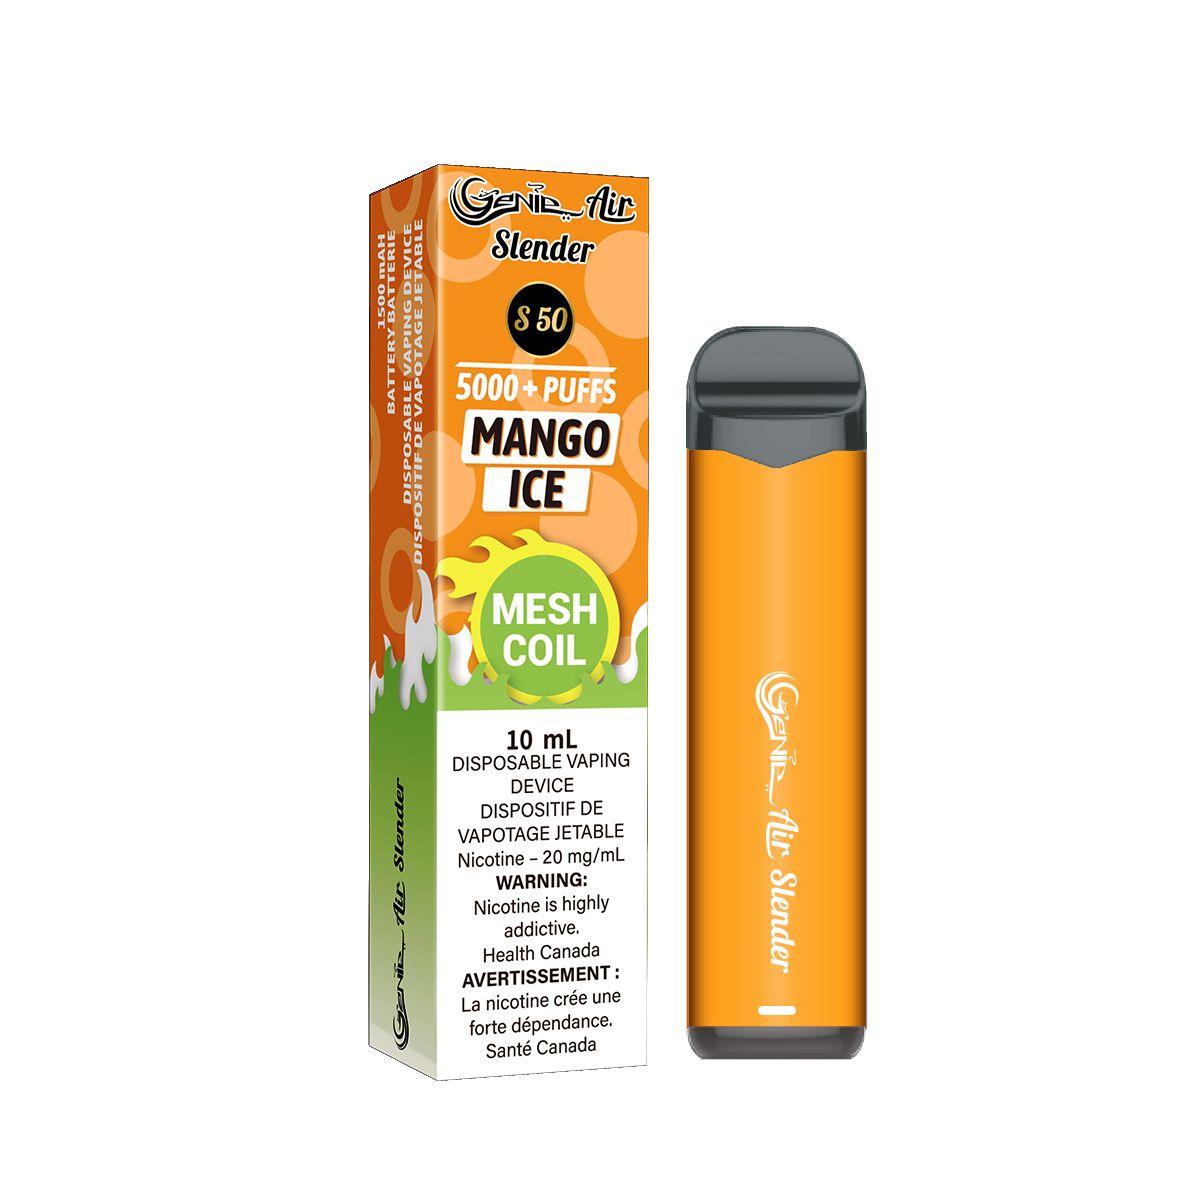 Mango ice Genie slender 5000 Puffs per 1 disposable device  Fully charged  2% Salt Nicotine  Battery: 1500 mAh  Mesh Coil Technology s50